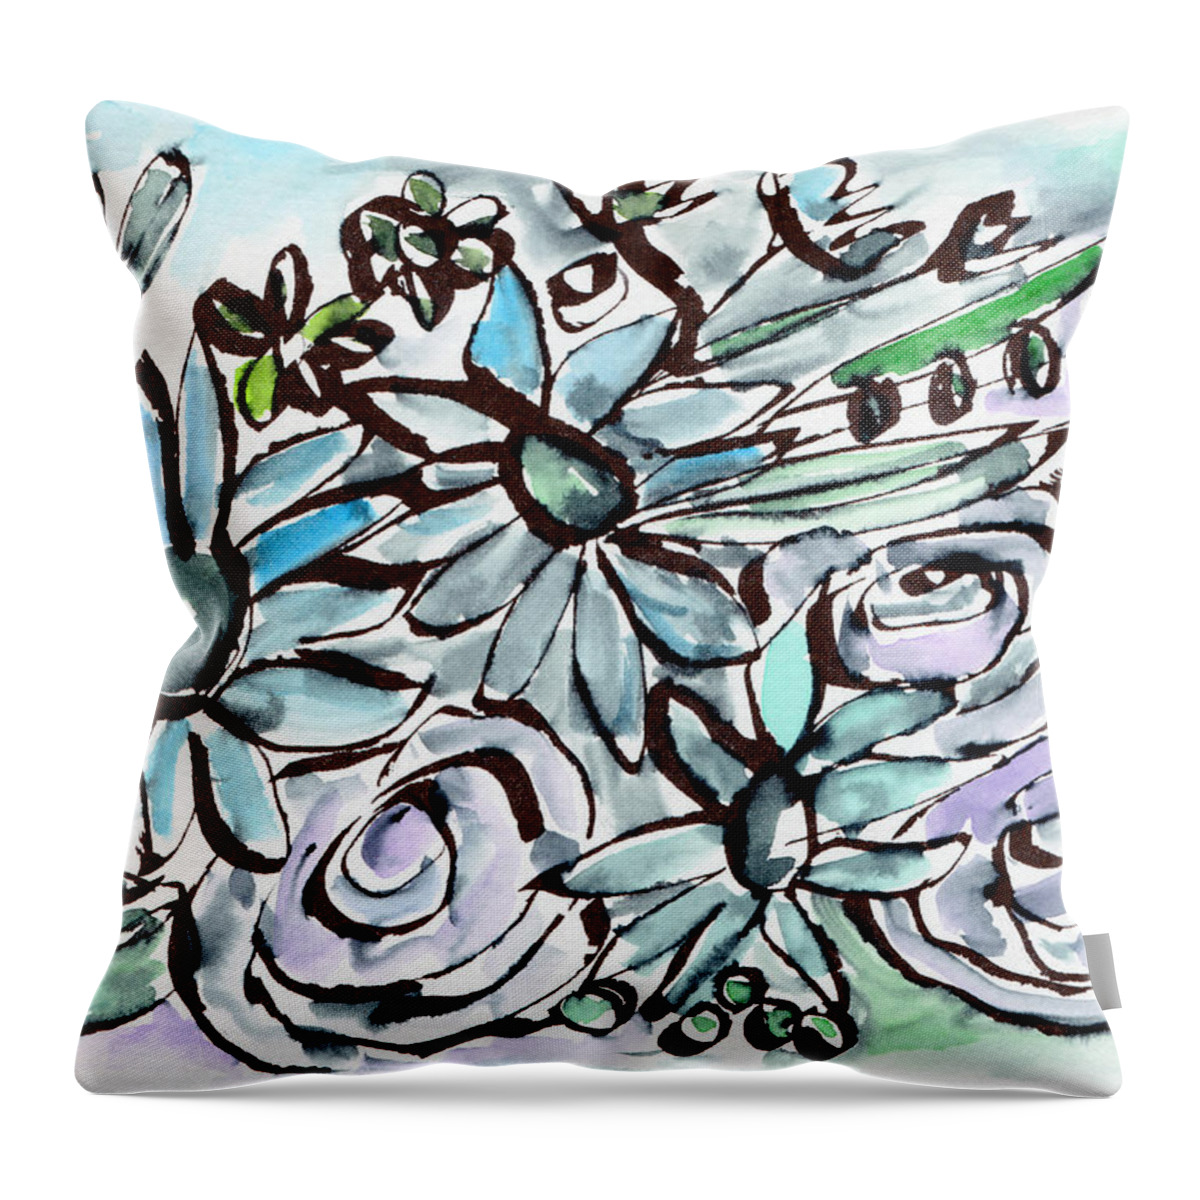 Flowers Throw Pillow featuring the painting Beach Glass Flowers 2- Art by Linda Woods by Linda Woods